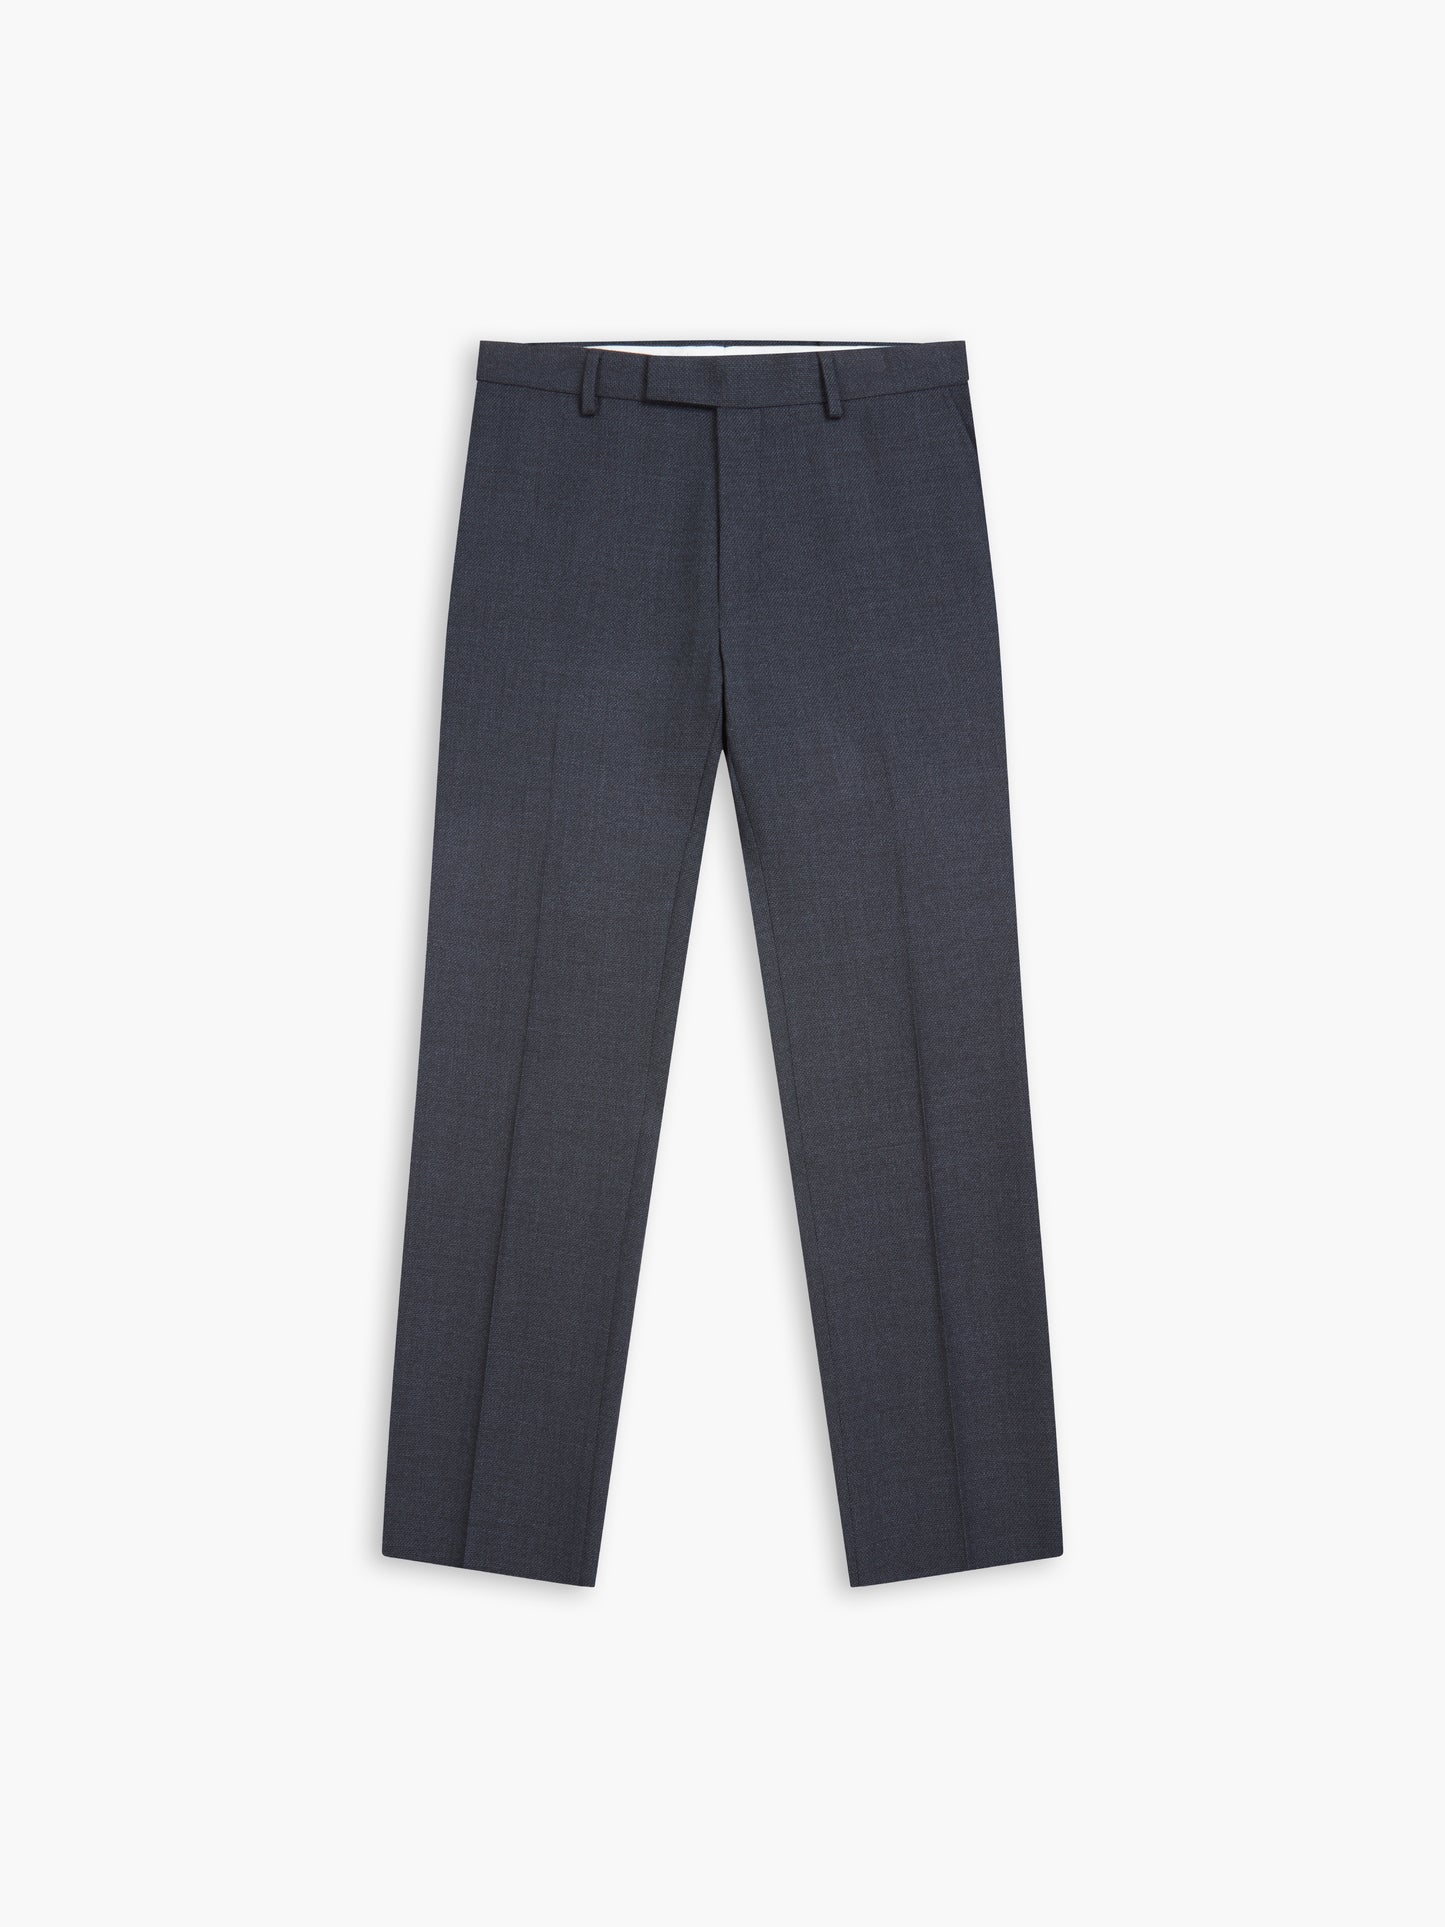 Wordsworth Woven in England Slim Fit Navy Micro Puppytooth Trousers